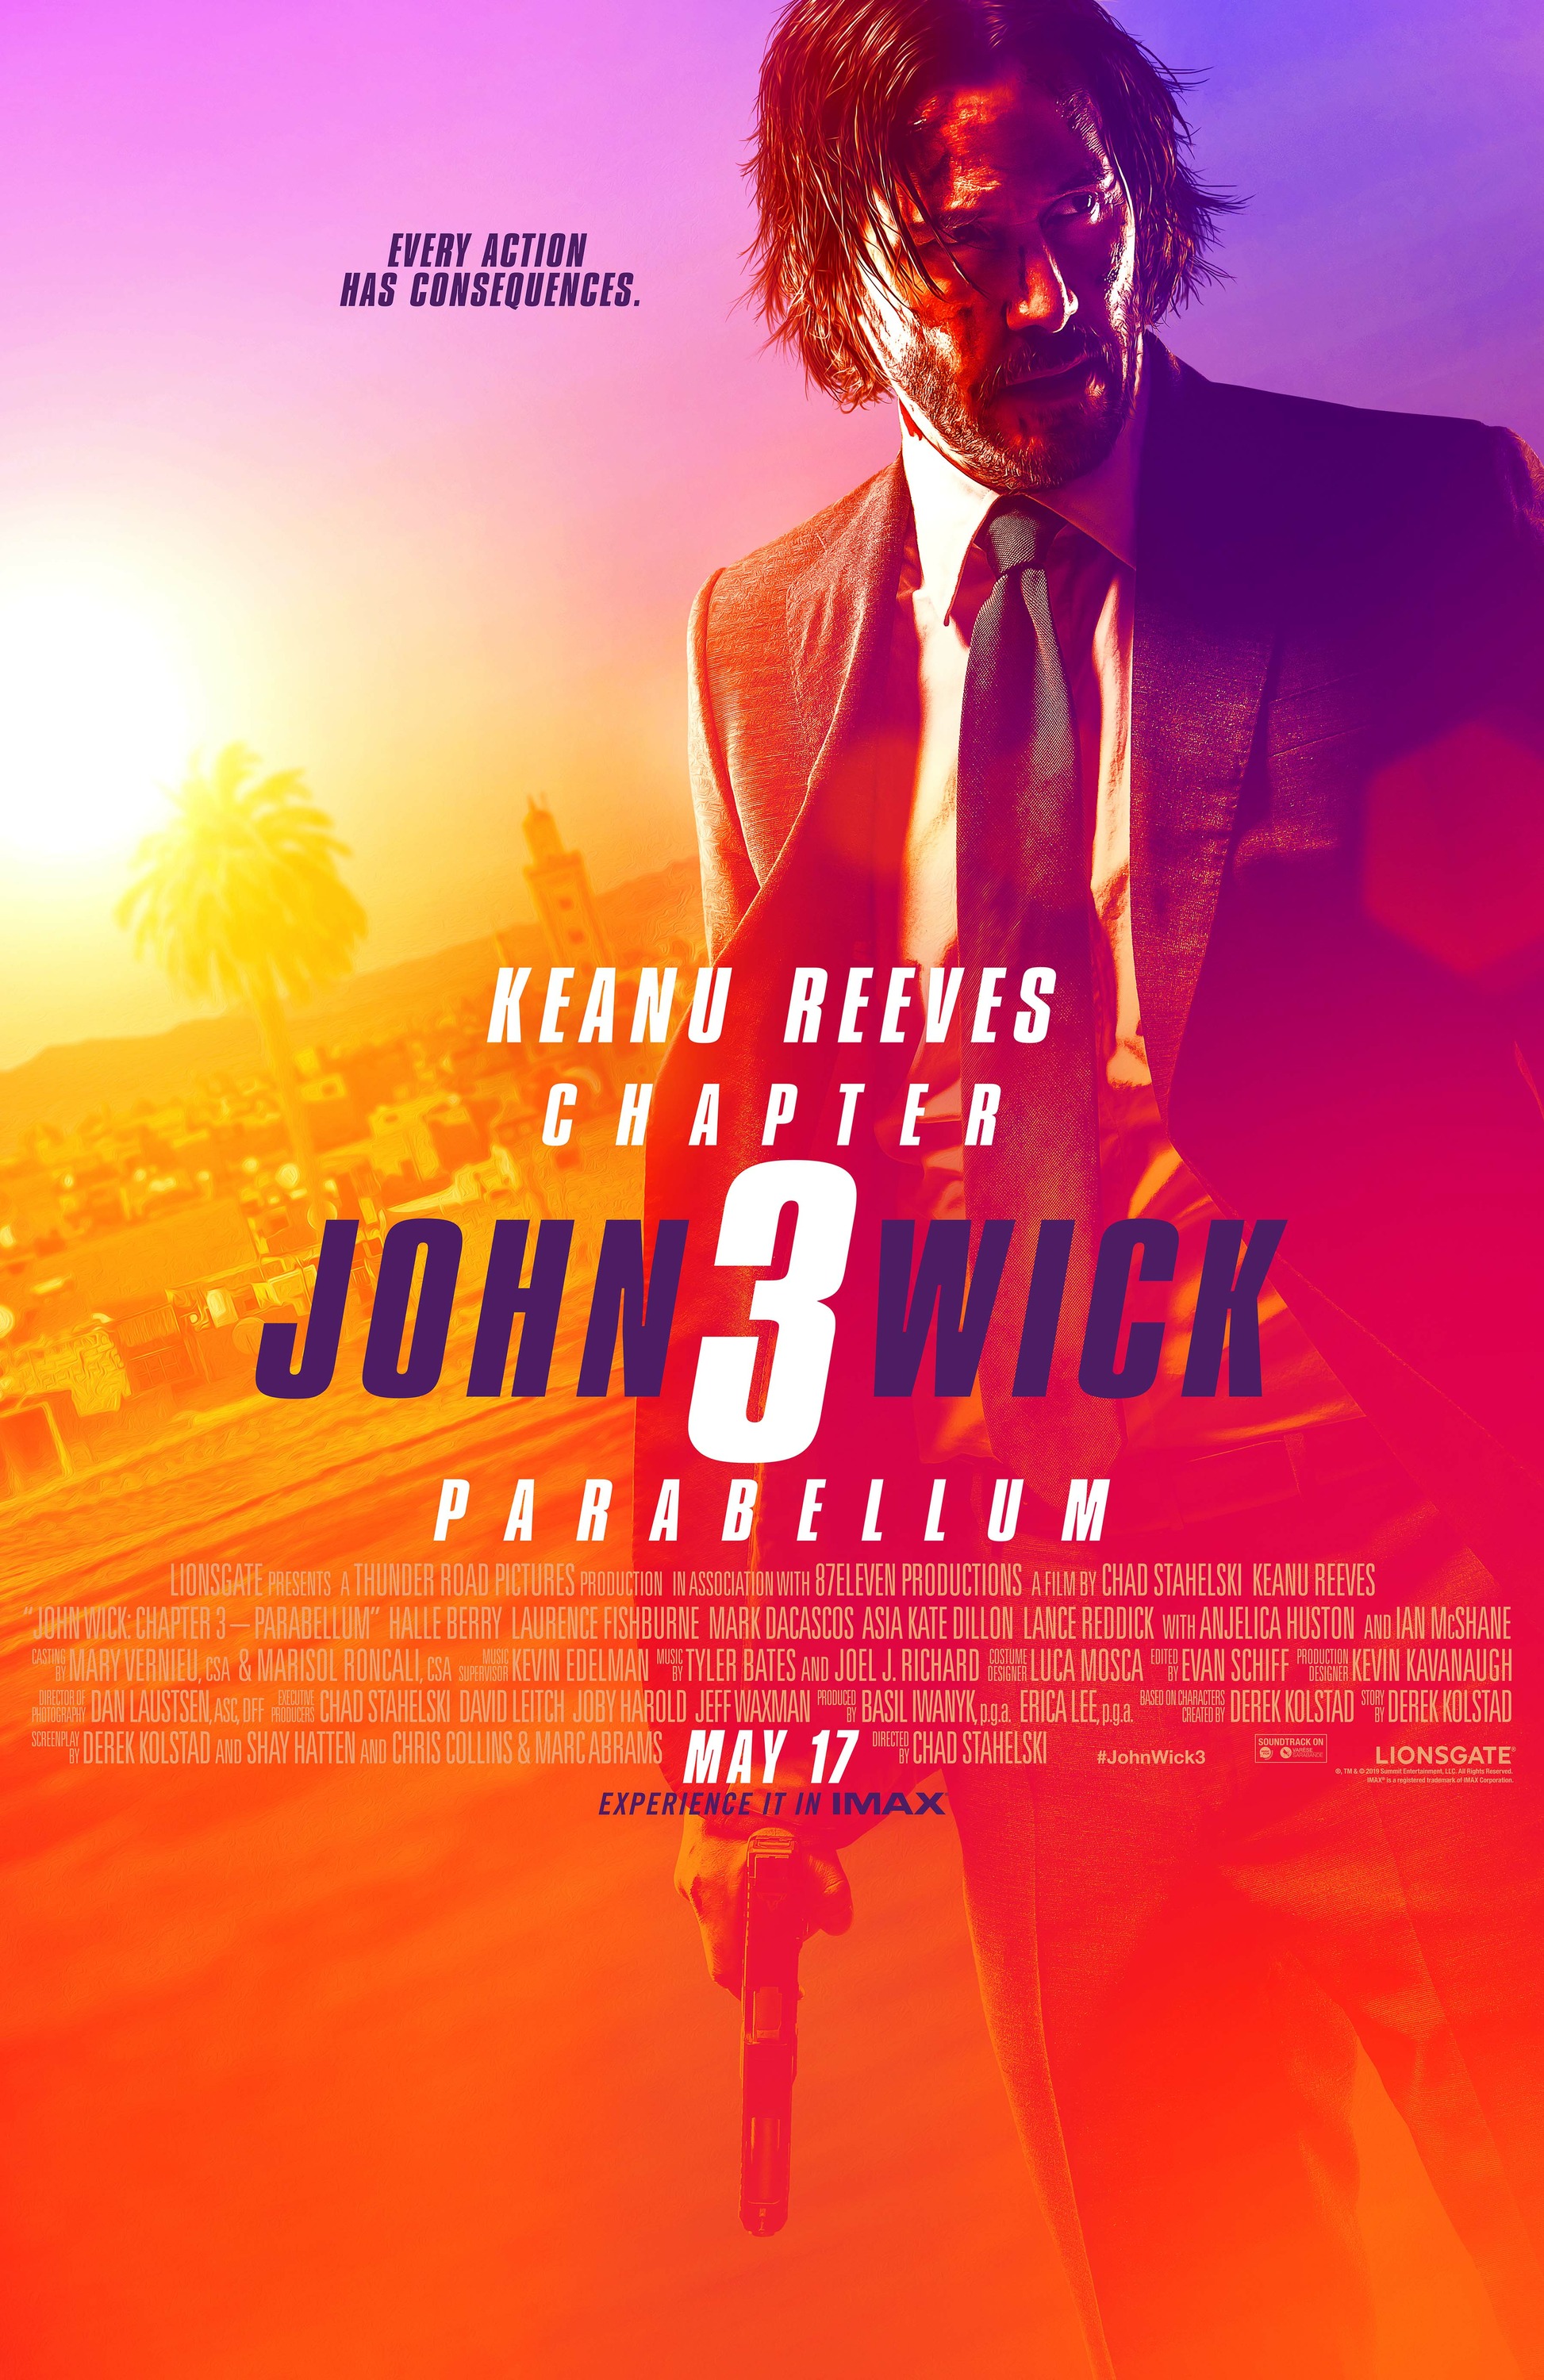 Mega Sized Movie Poster Image for John Wick: Chapter 3 - Parabellum (#14 of 27)